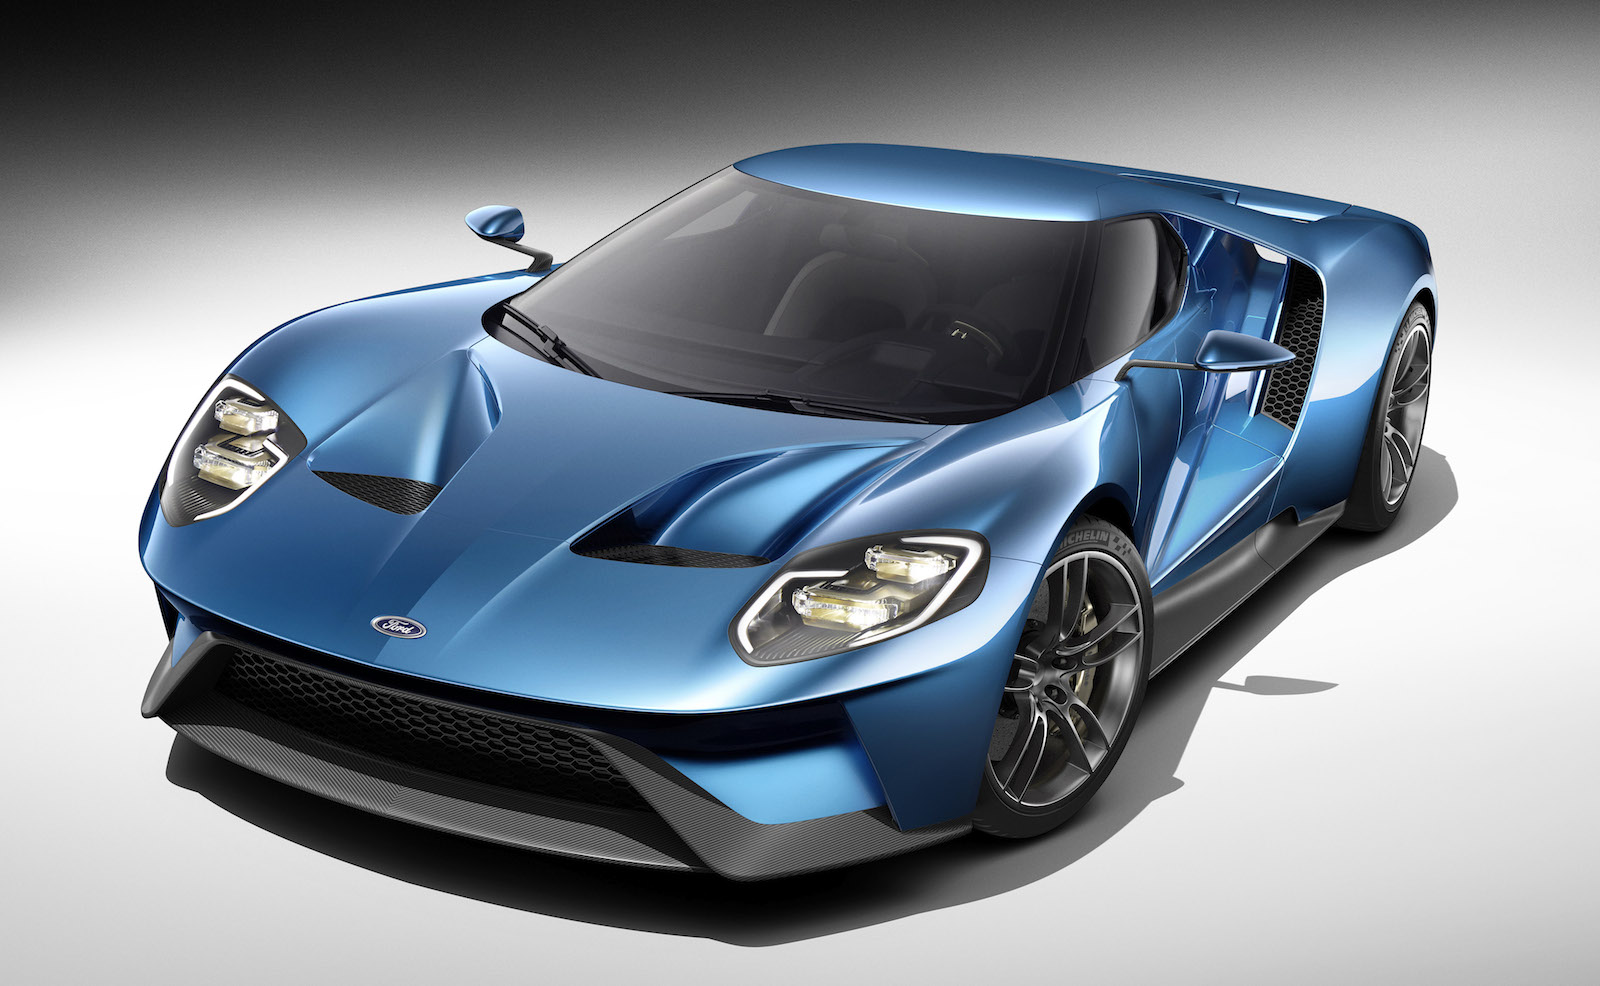 Ford Introduces A New Ford GT - Available In 2016